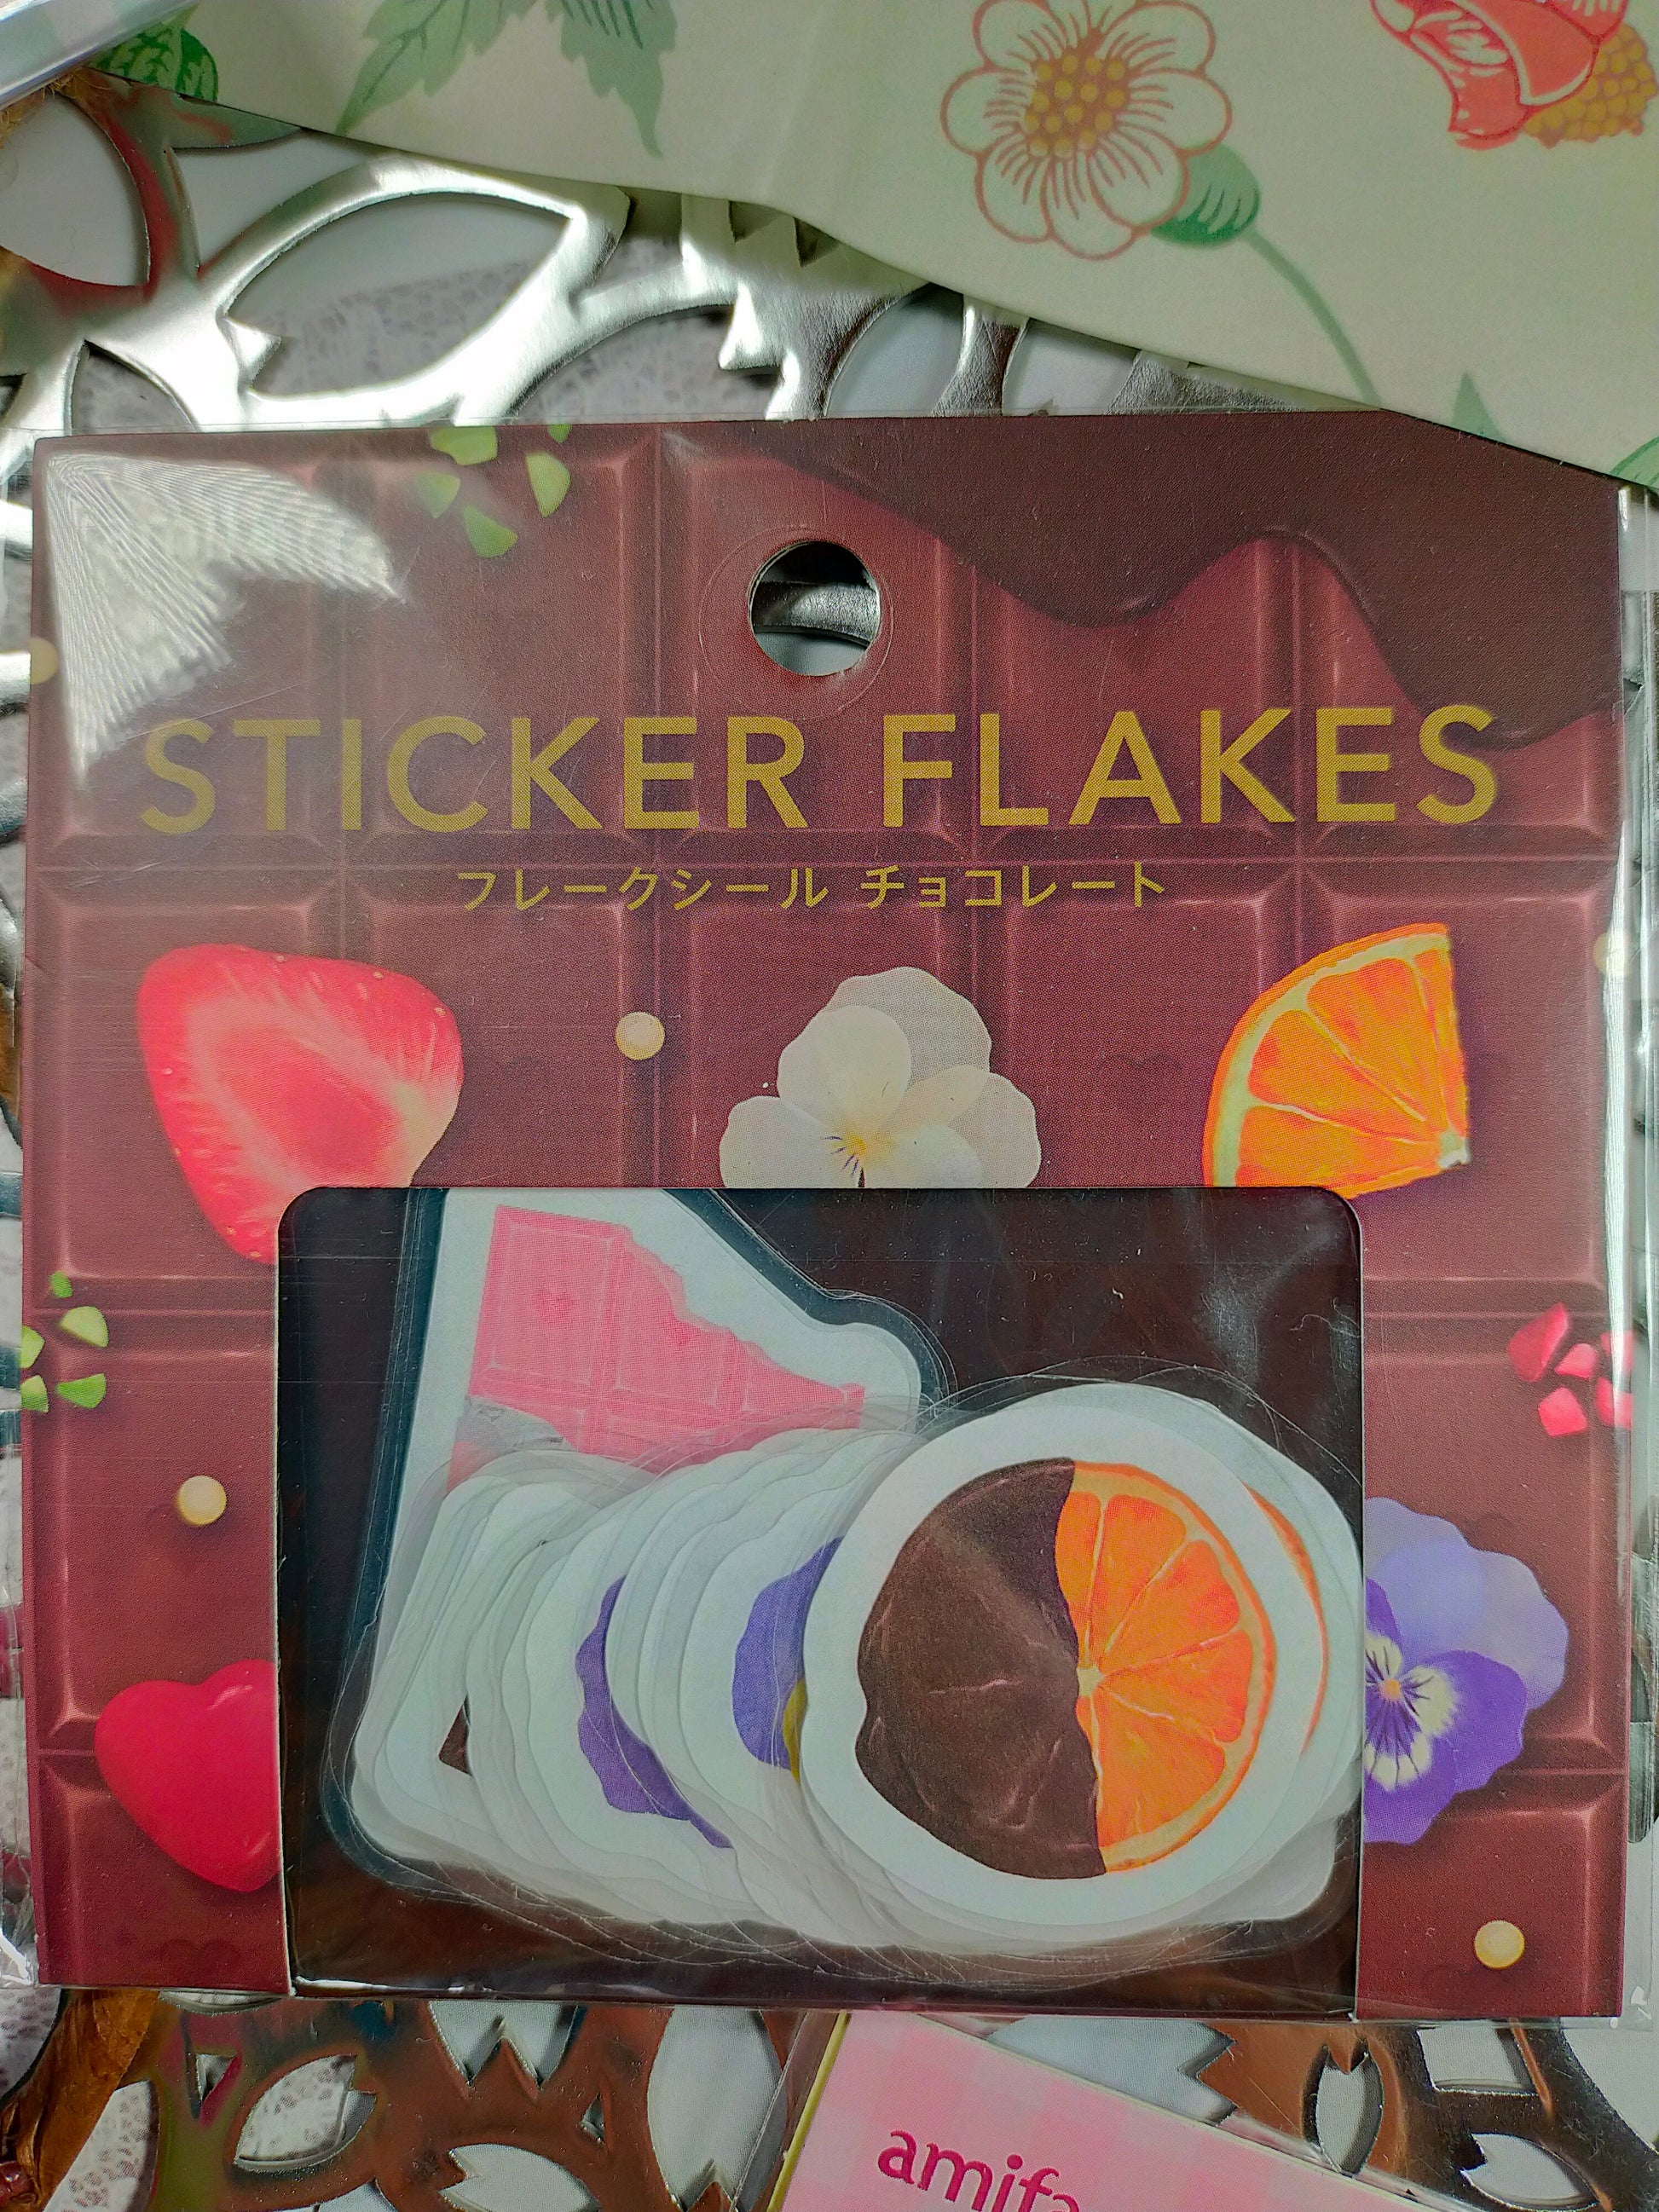 STICKER FLAKES Sweet and food 10designs*3pieces, amifa_ Retro Shop / Chocolate / Strawberry sweets